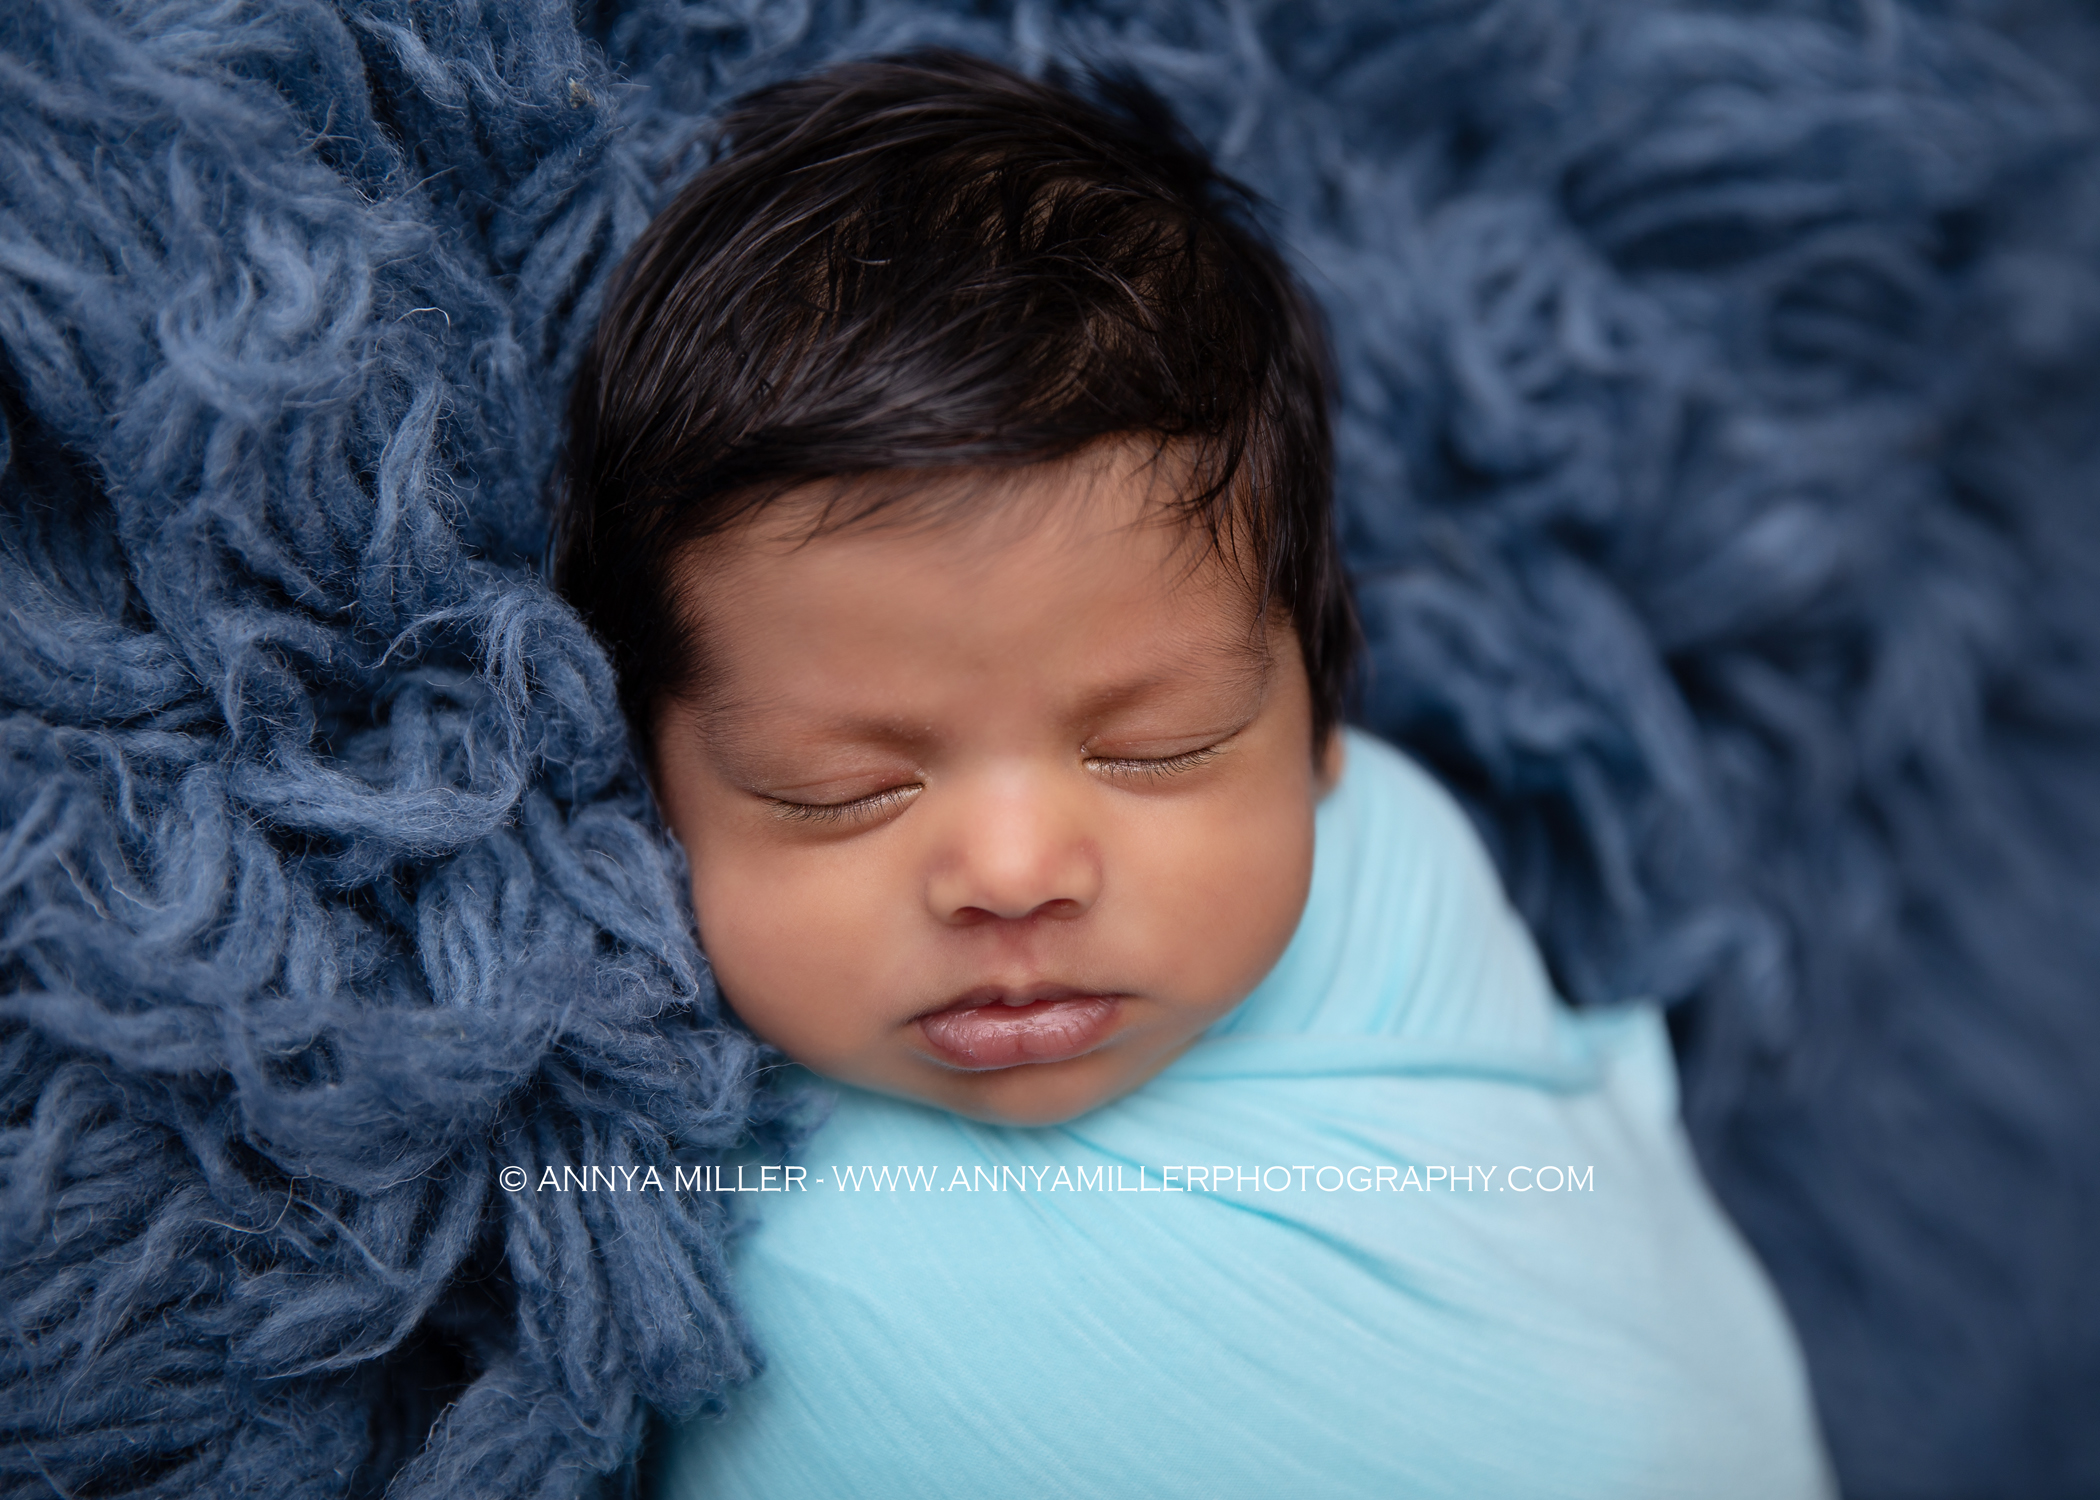 Durham newborn photos of baby boy wrapped in blue by Annya Miller photography